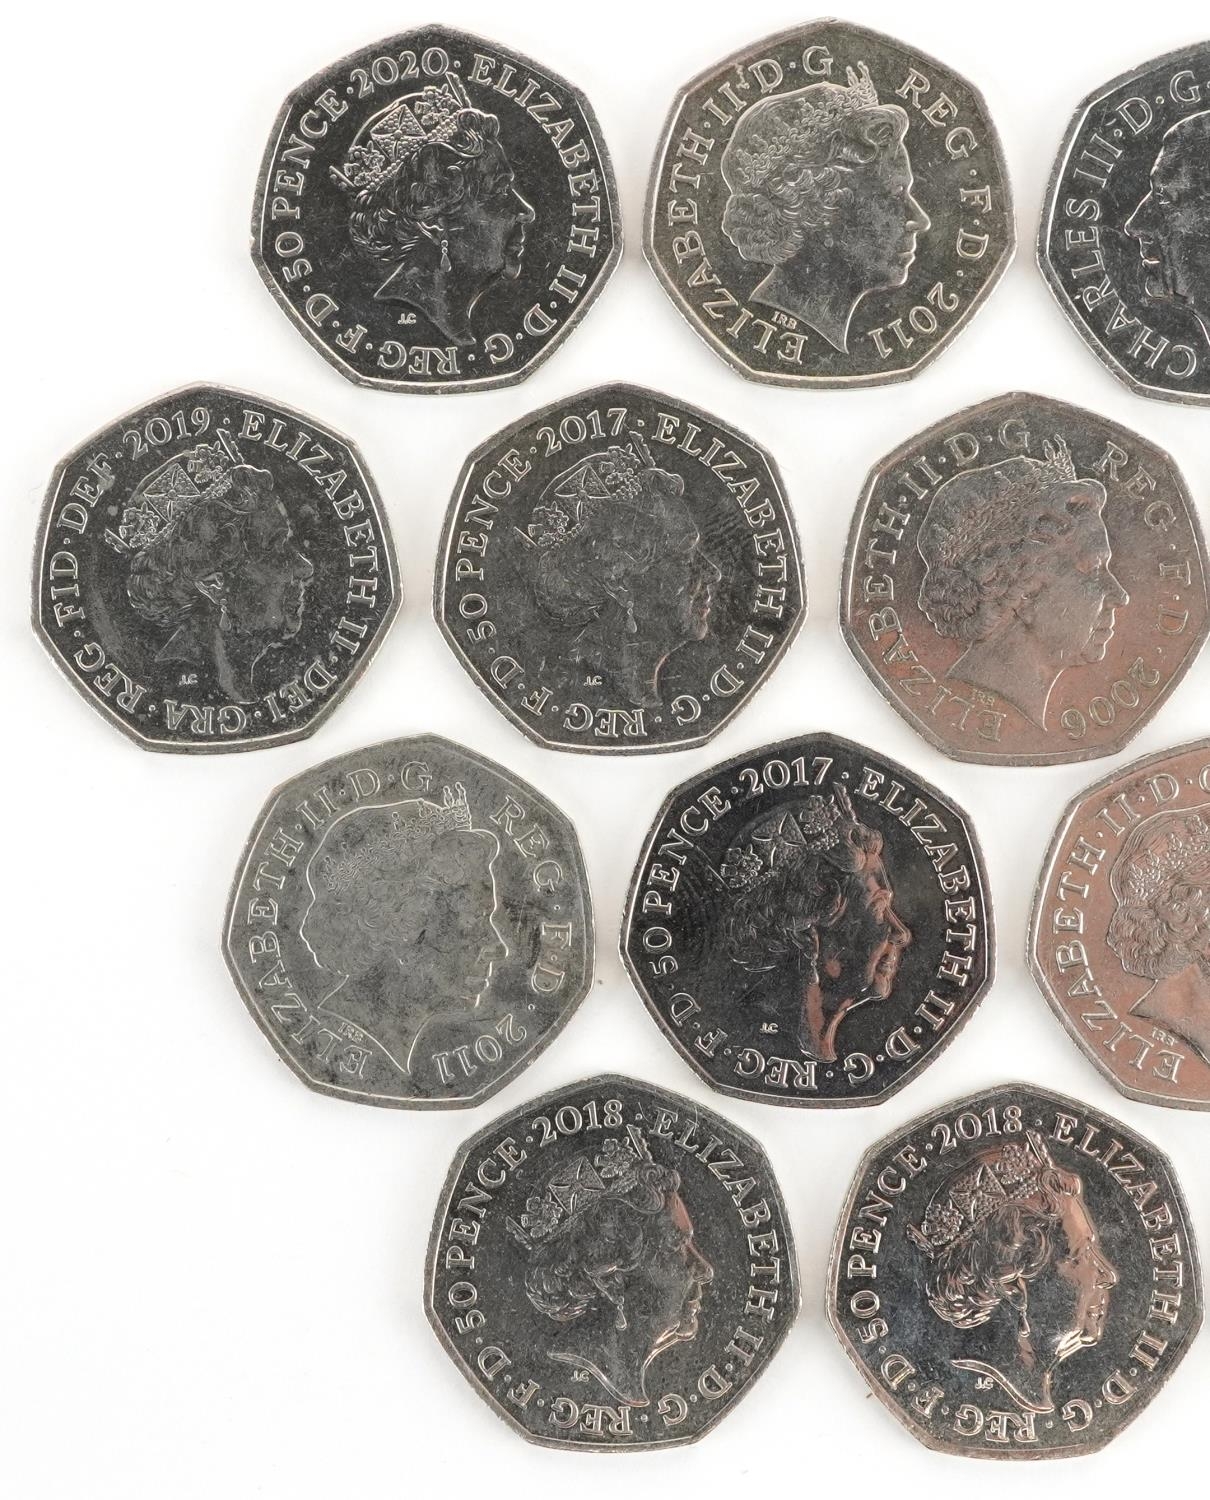 Twenty Elizabeth II fifty pence pieces, various designs including London 2012 Olympics and - Image 5 of 6